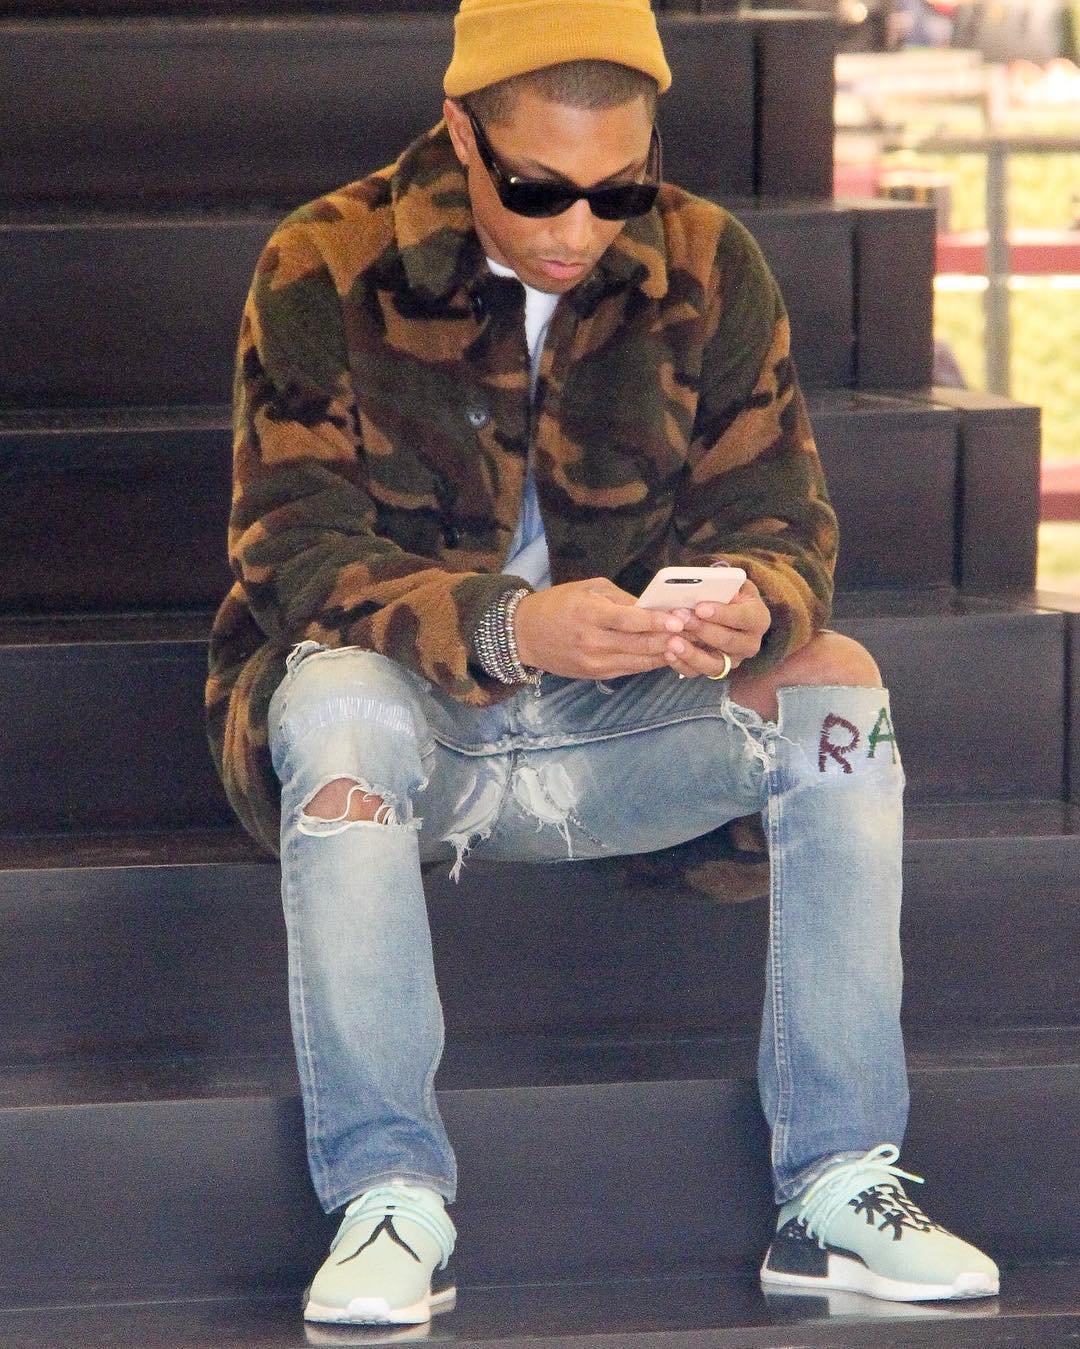 SPOTTED: Pharrell Williams In Camo Coat, Chanel Sunglasses And Adidas NMD’s